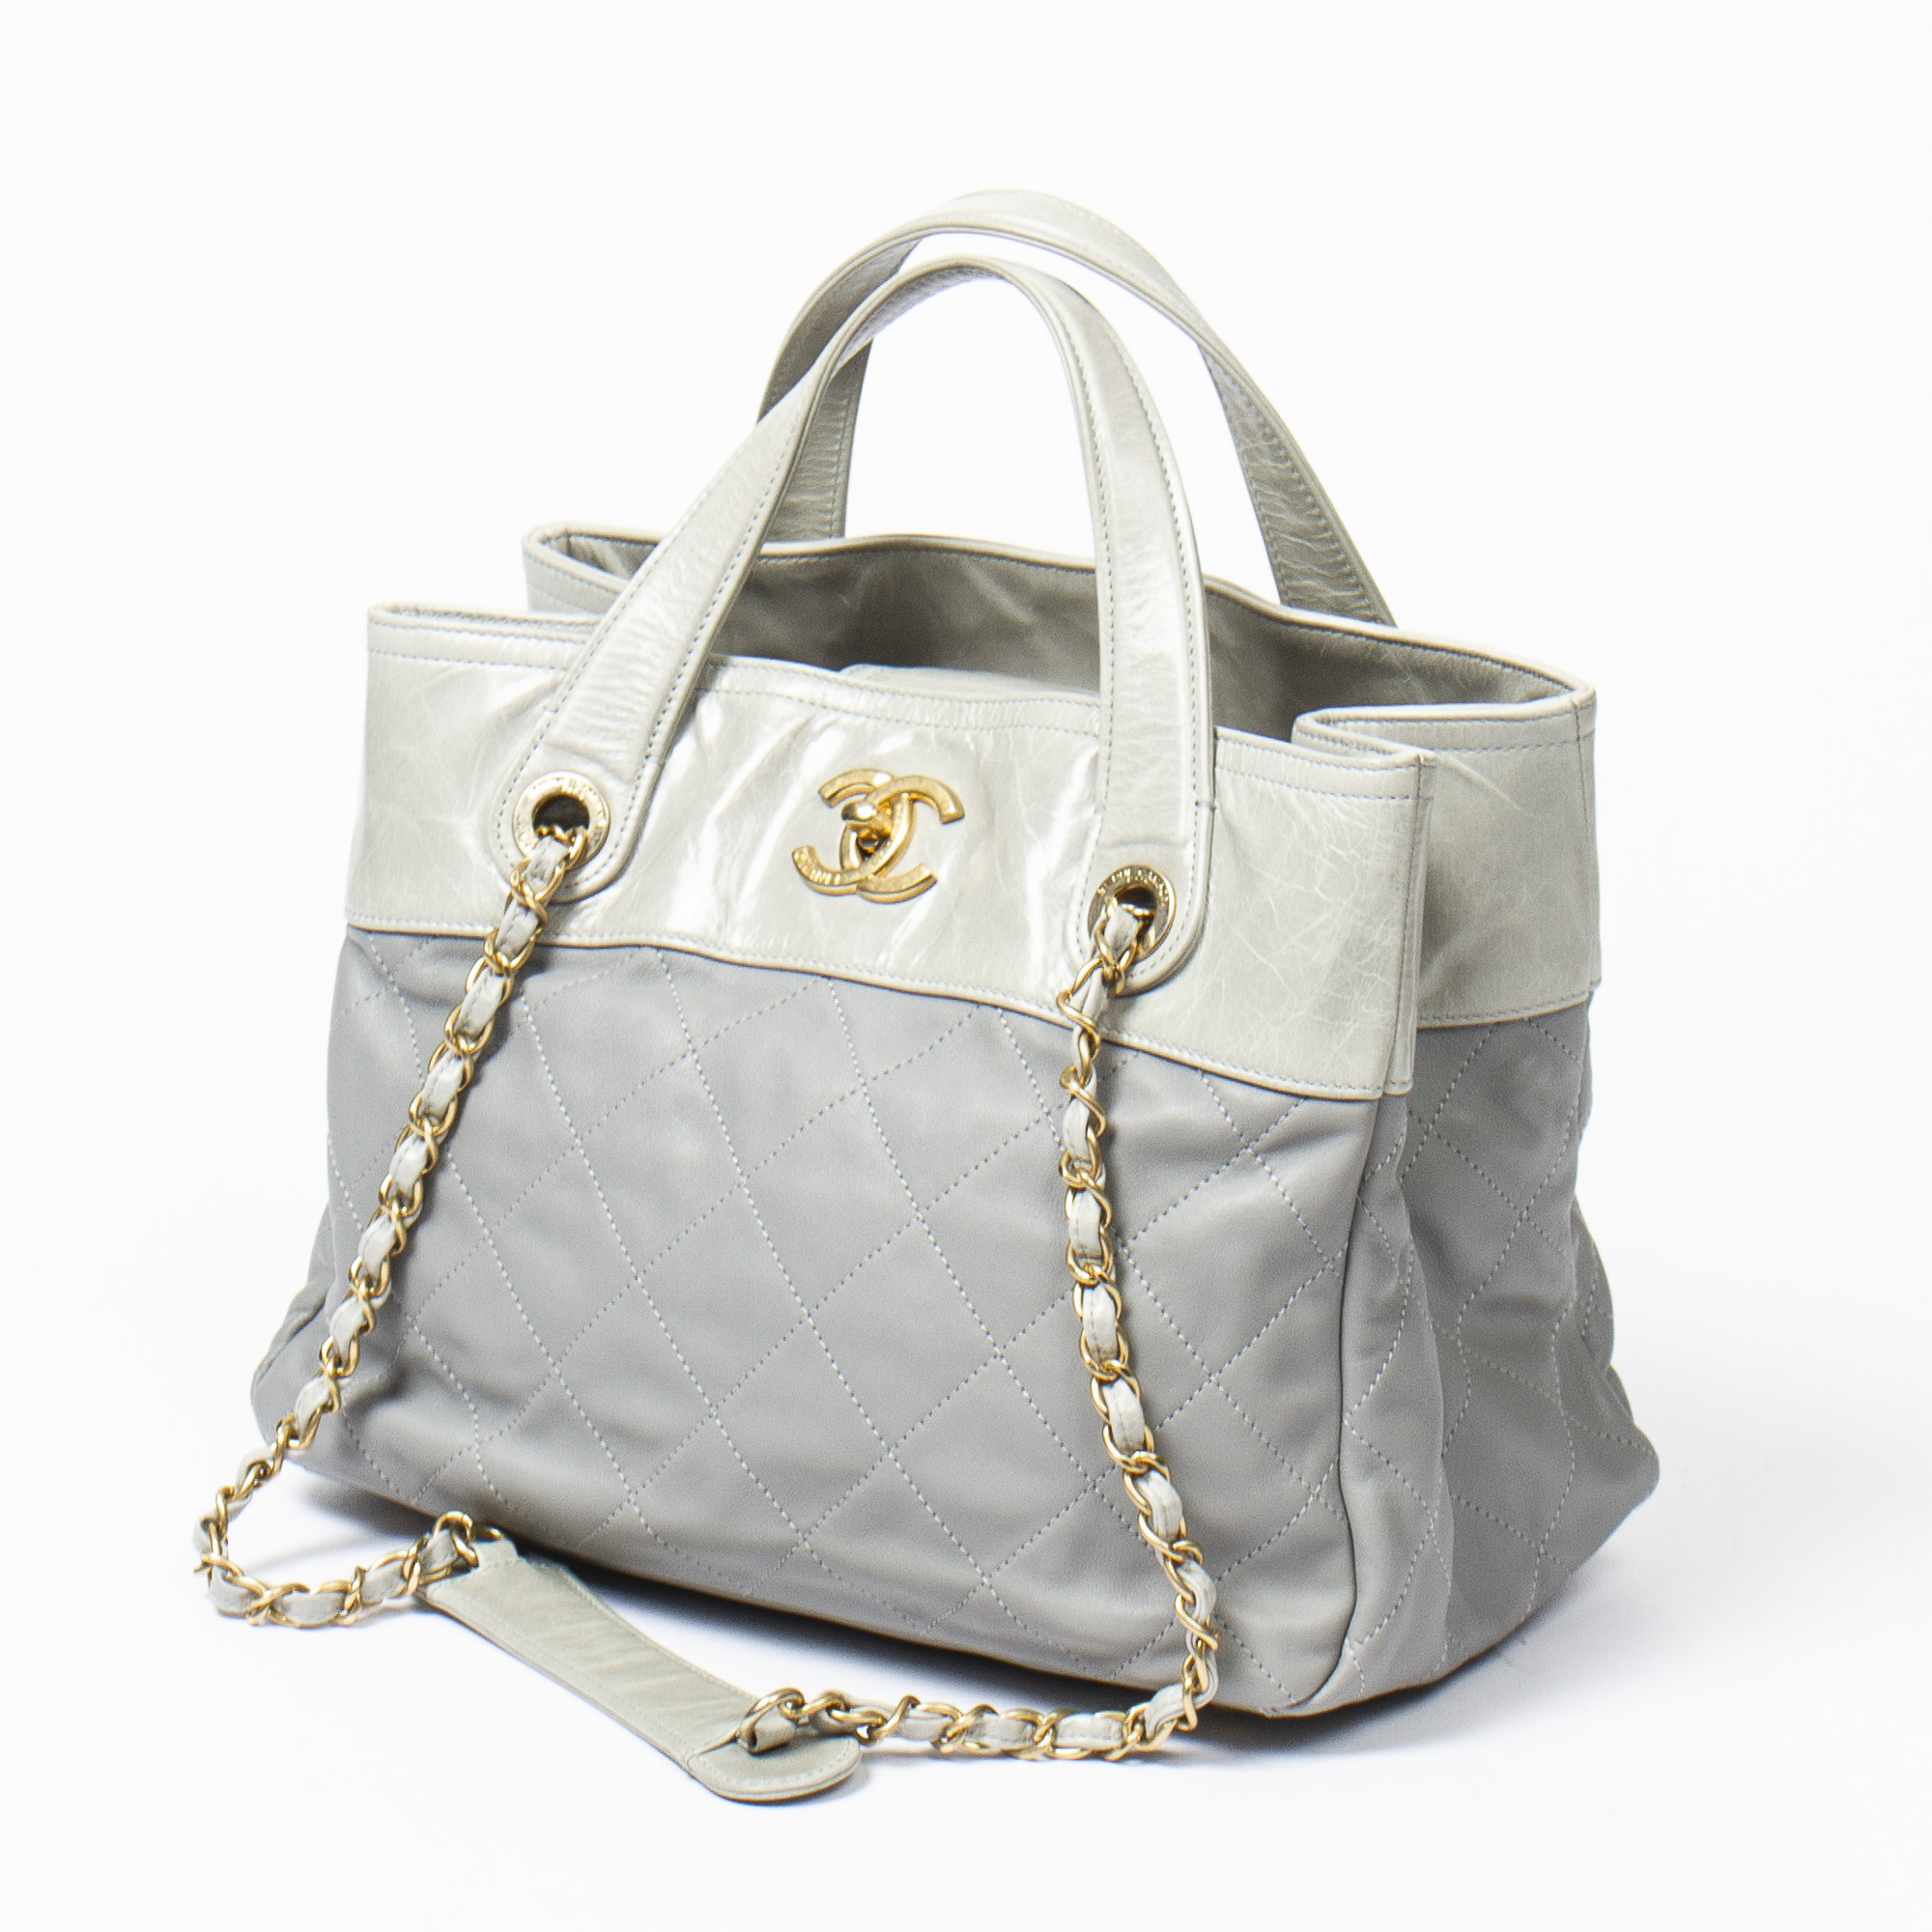 Chanel Iridescent Calfskin in The Mix Bowler Small Tote (SHF-otOqlH)